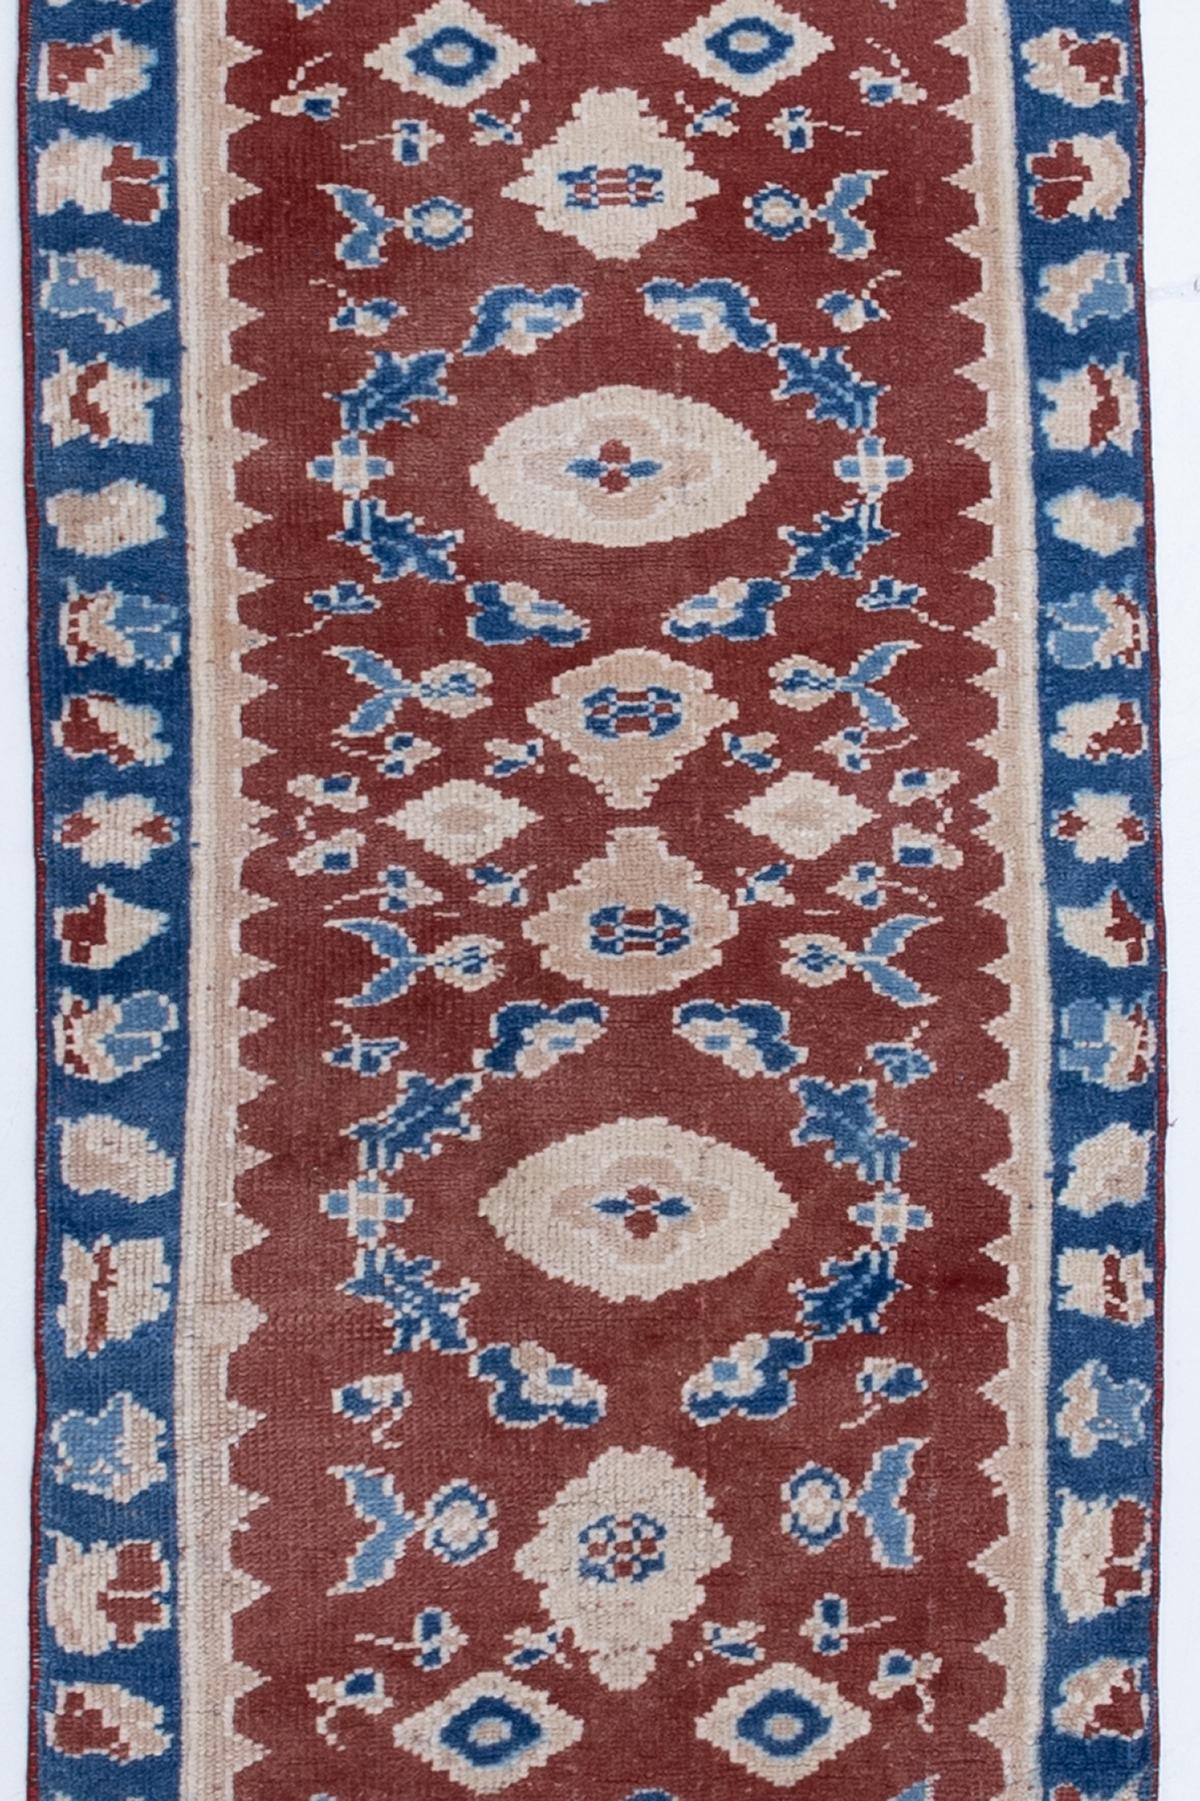 Age: Circa 1960

Colors: red, blue, ivory

Pile: medium

Wear Notes: 0

Material: wool

Vibrant and original colorway, this midcentury Turkish runner has a lovely red field and blue accents. Soft underfoot and safe for high traffic